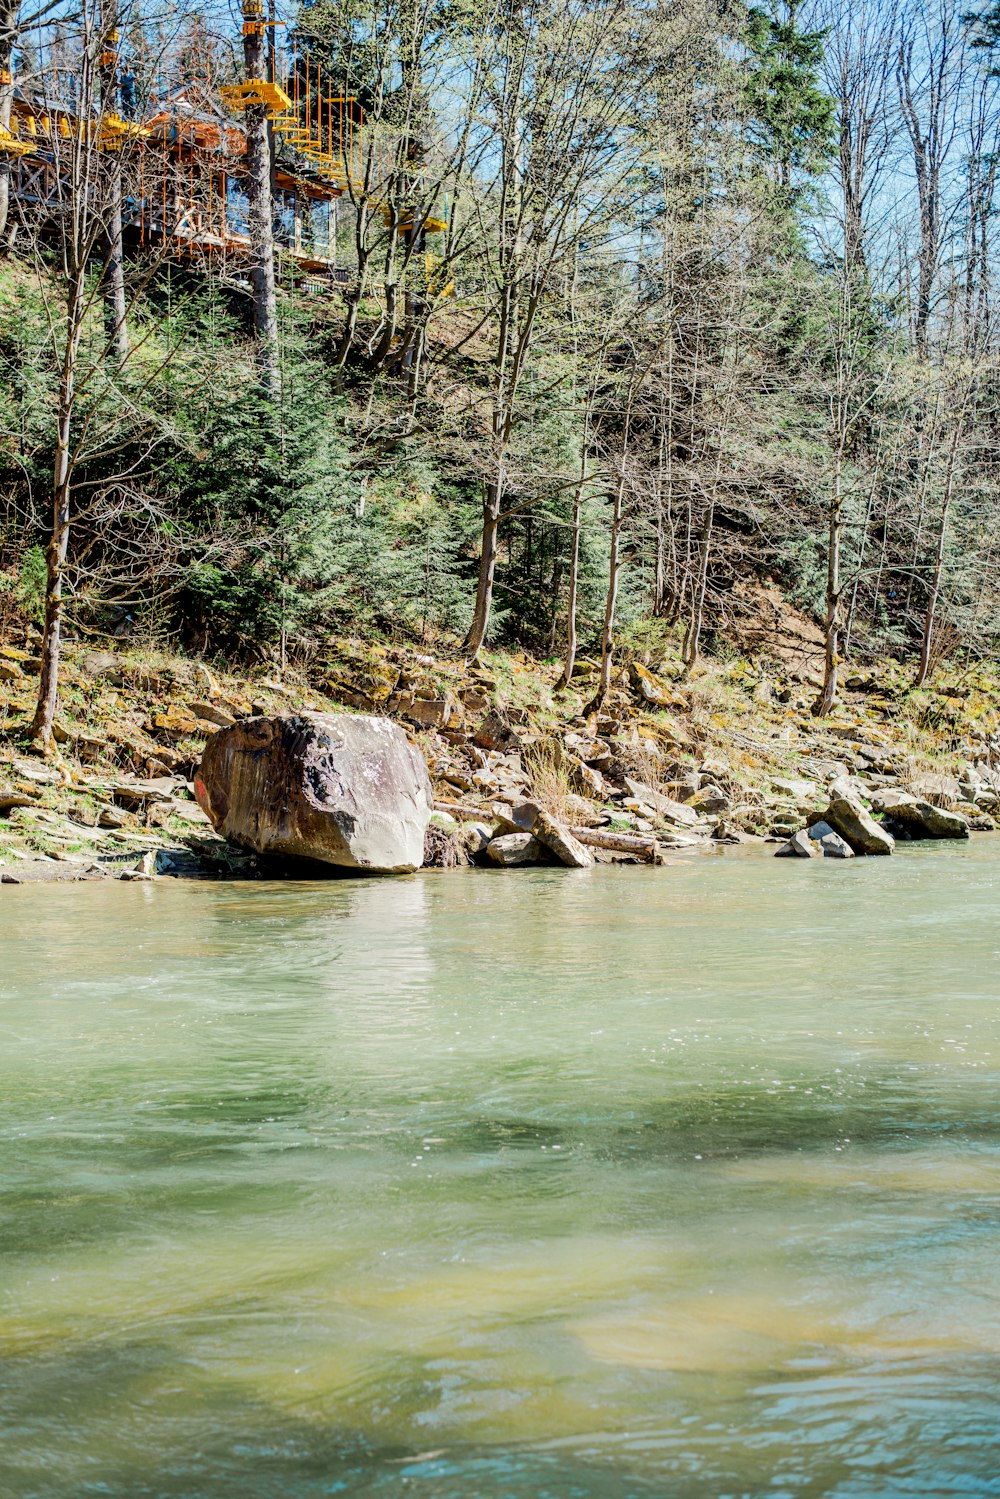 a large rock sitting in the middle of a river